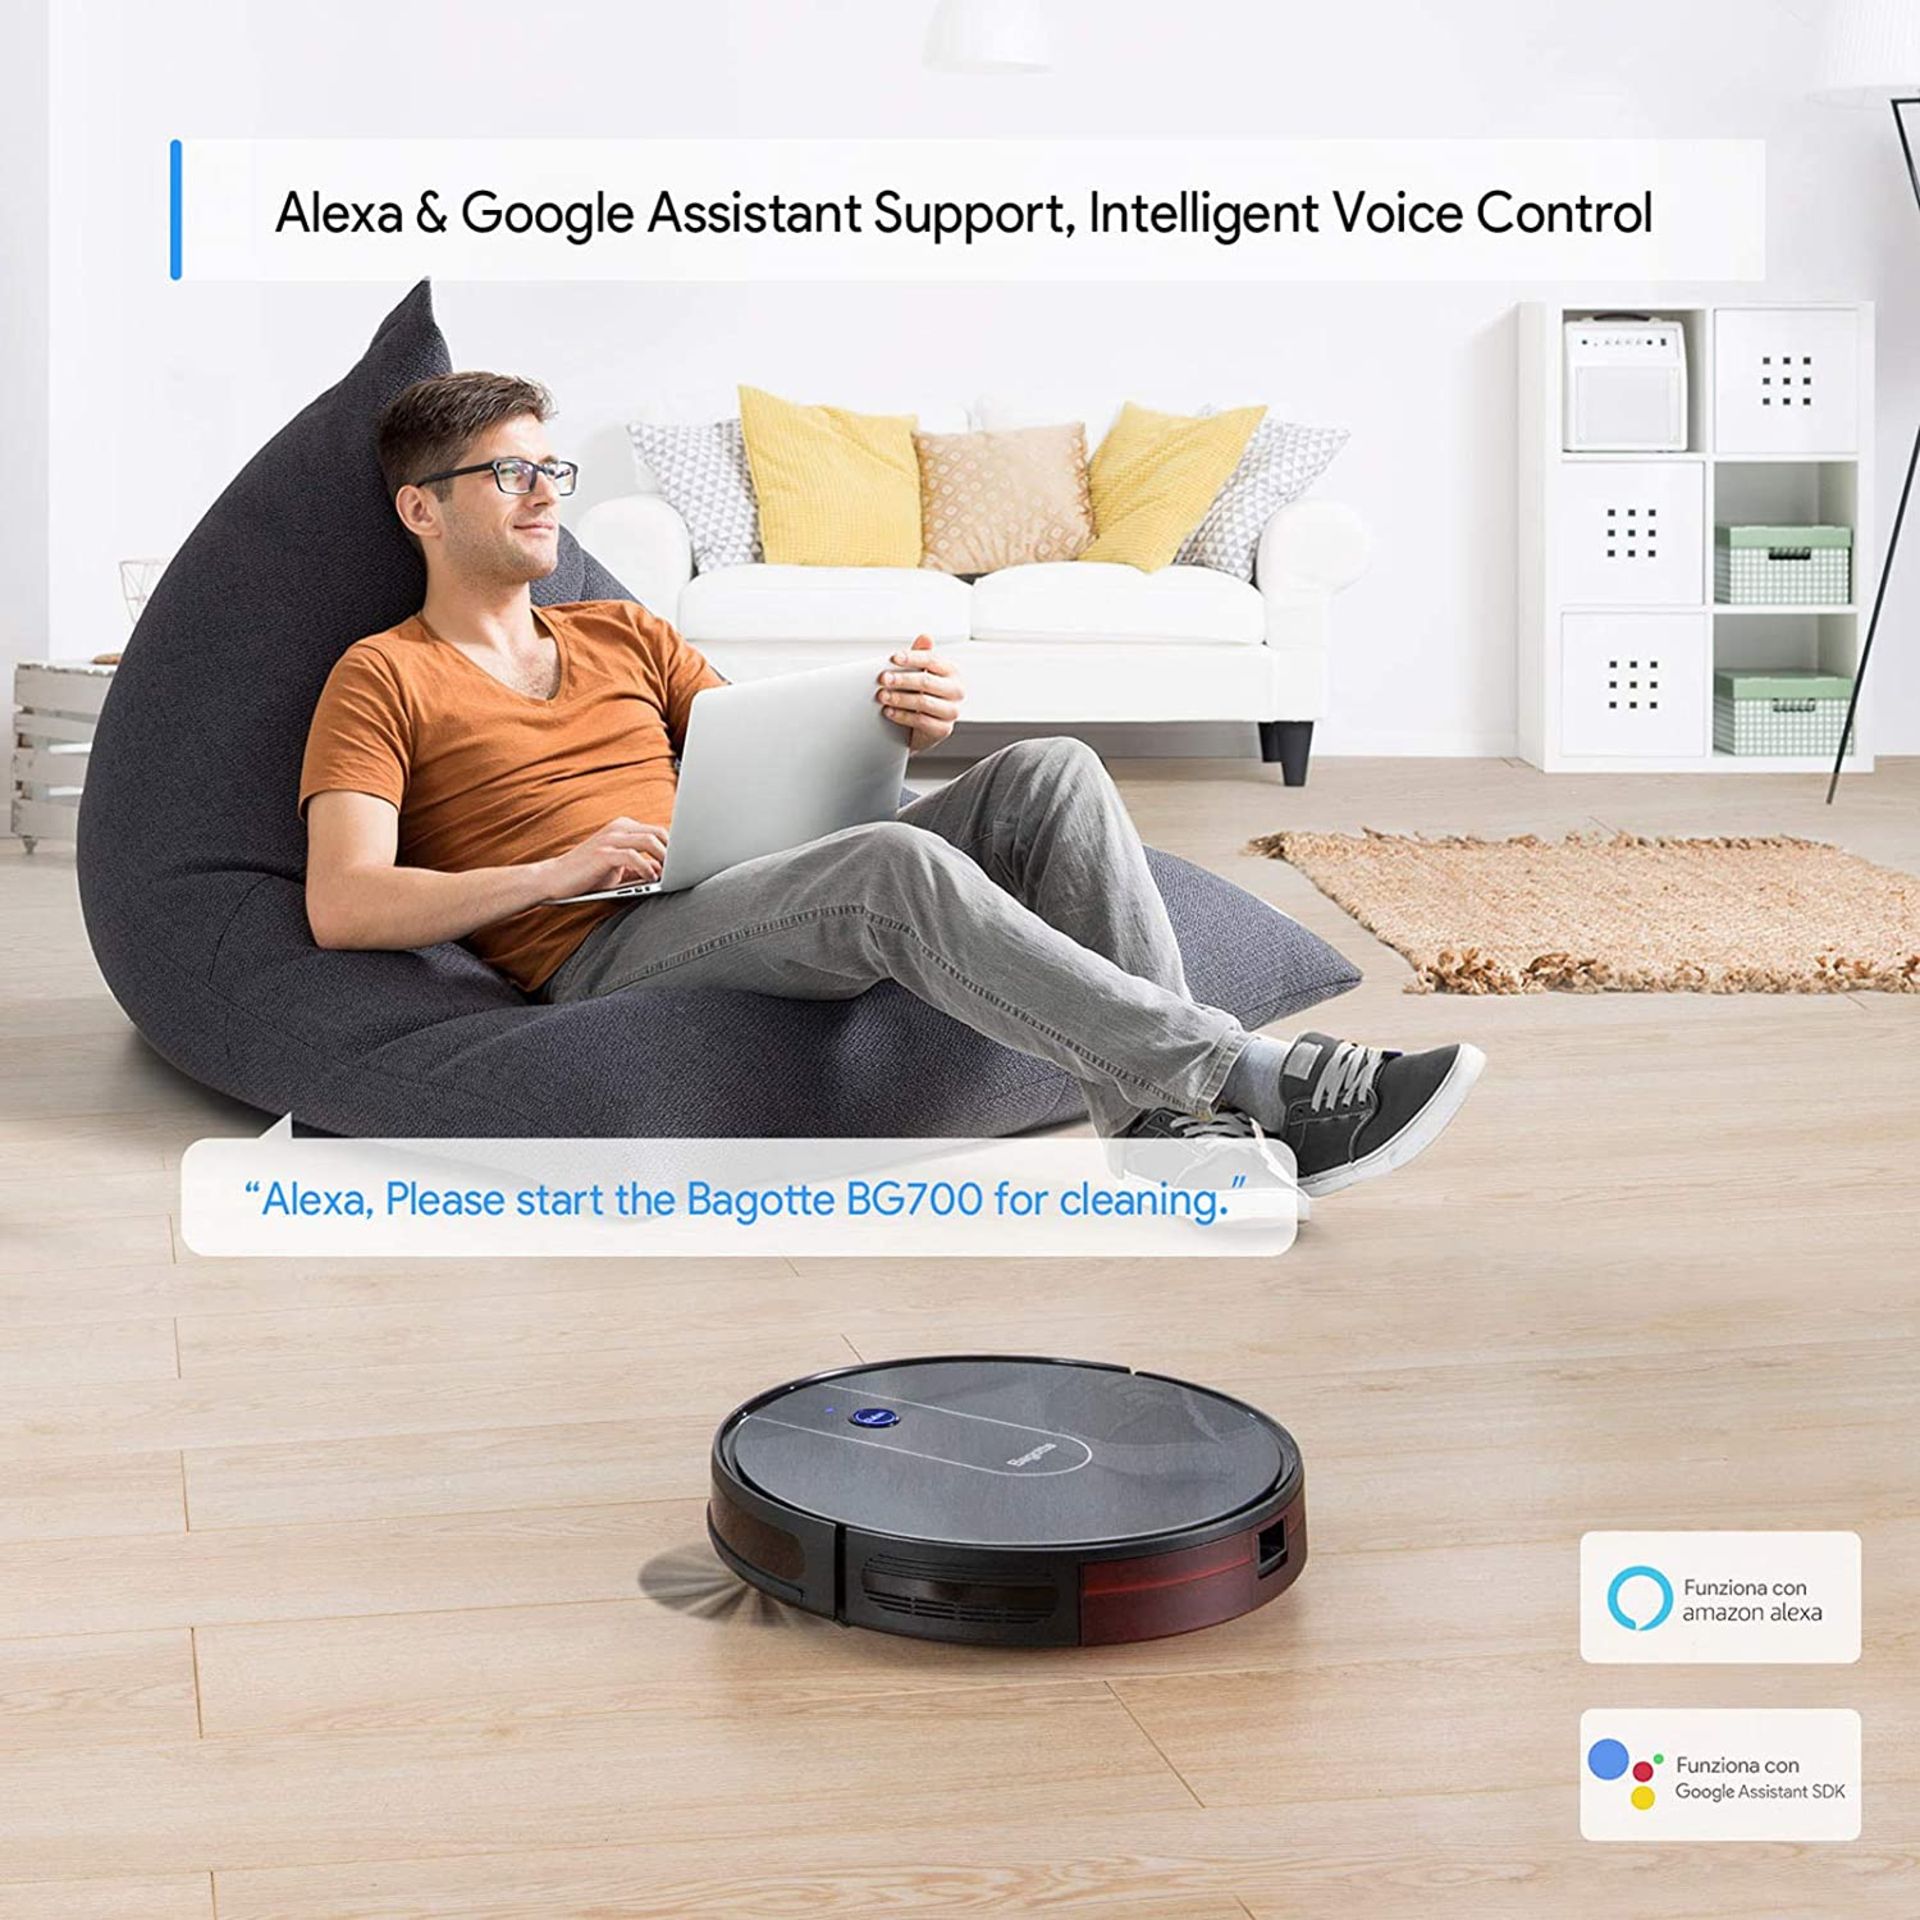 Bagotte BG700 Wi-Fi Robot Vacuum with mop - 2.7" Thin, Strong Suction, Work with Alexa - Image 2 of 8